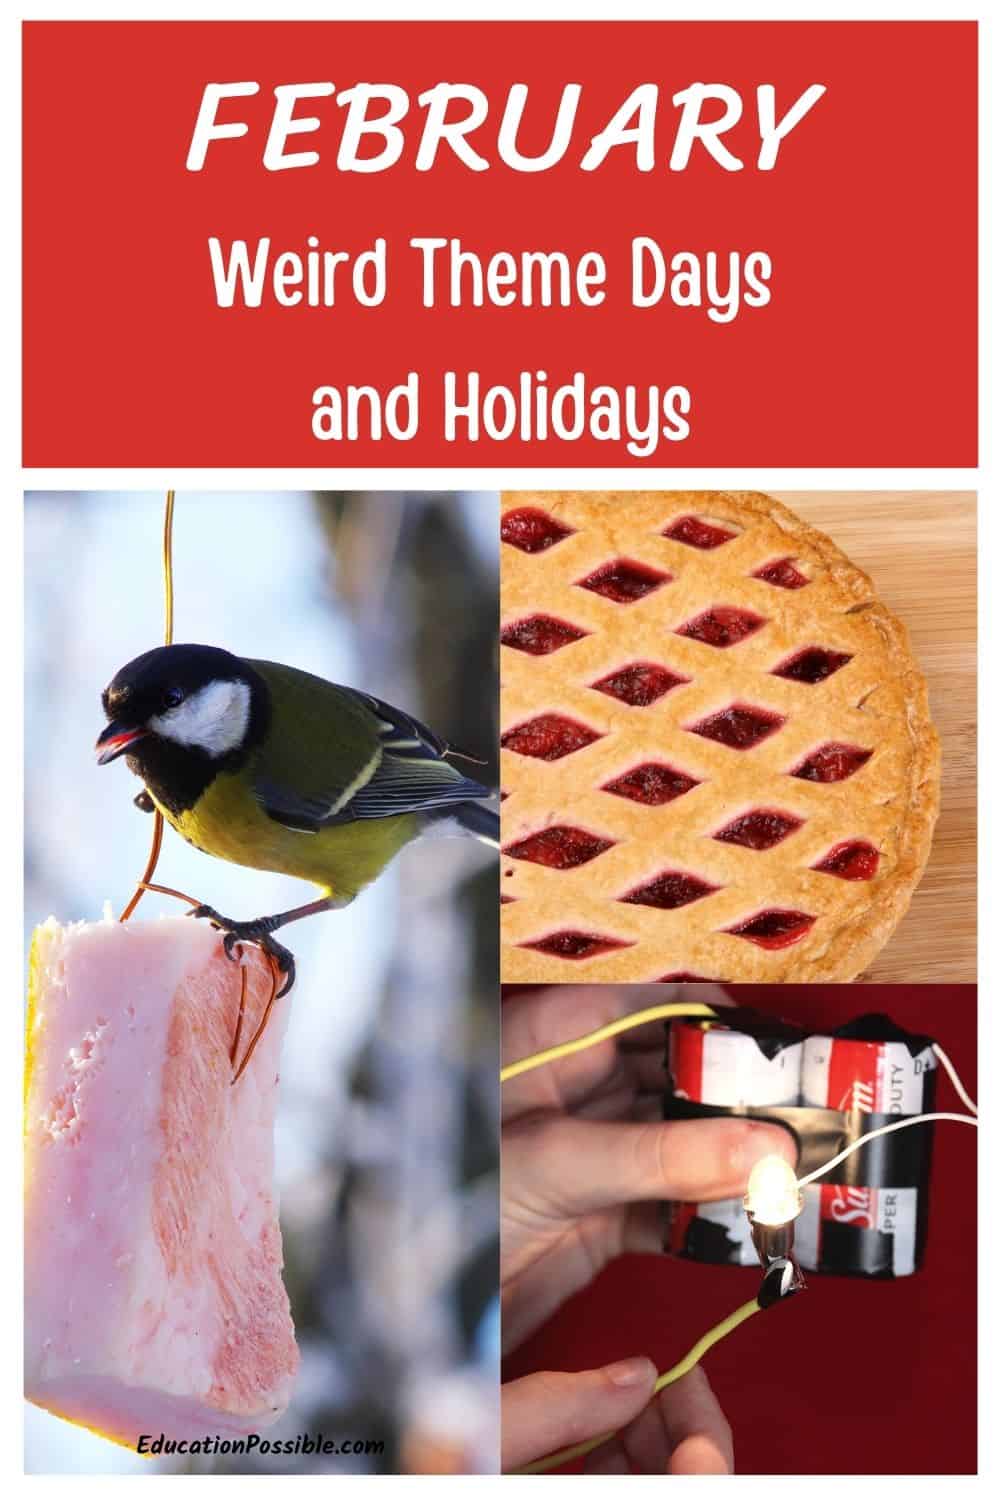 Collage of 3 images. Cherry pie, bird eating hanging fruit, batteries powering small light.